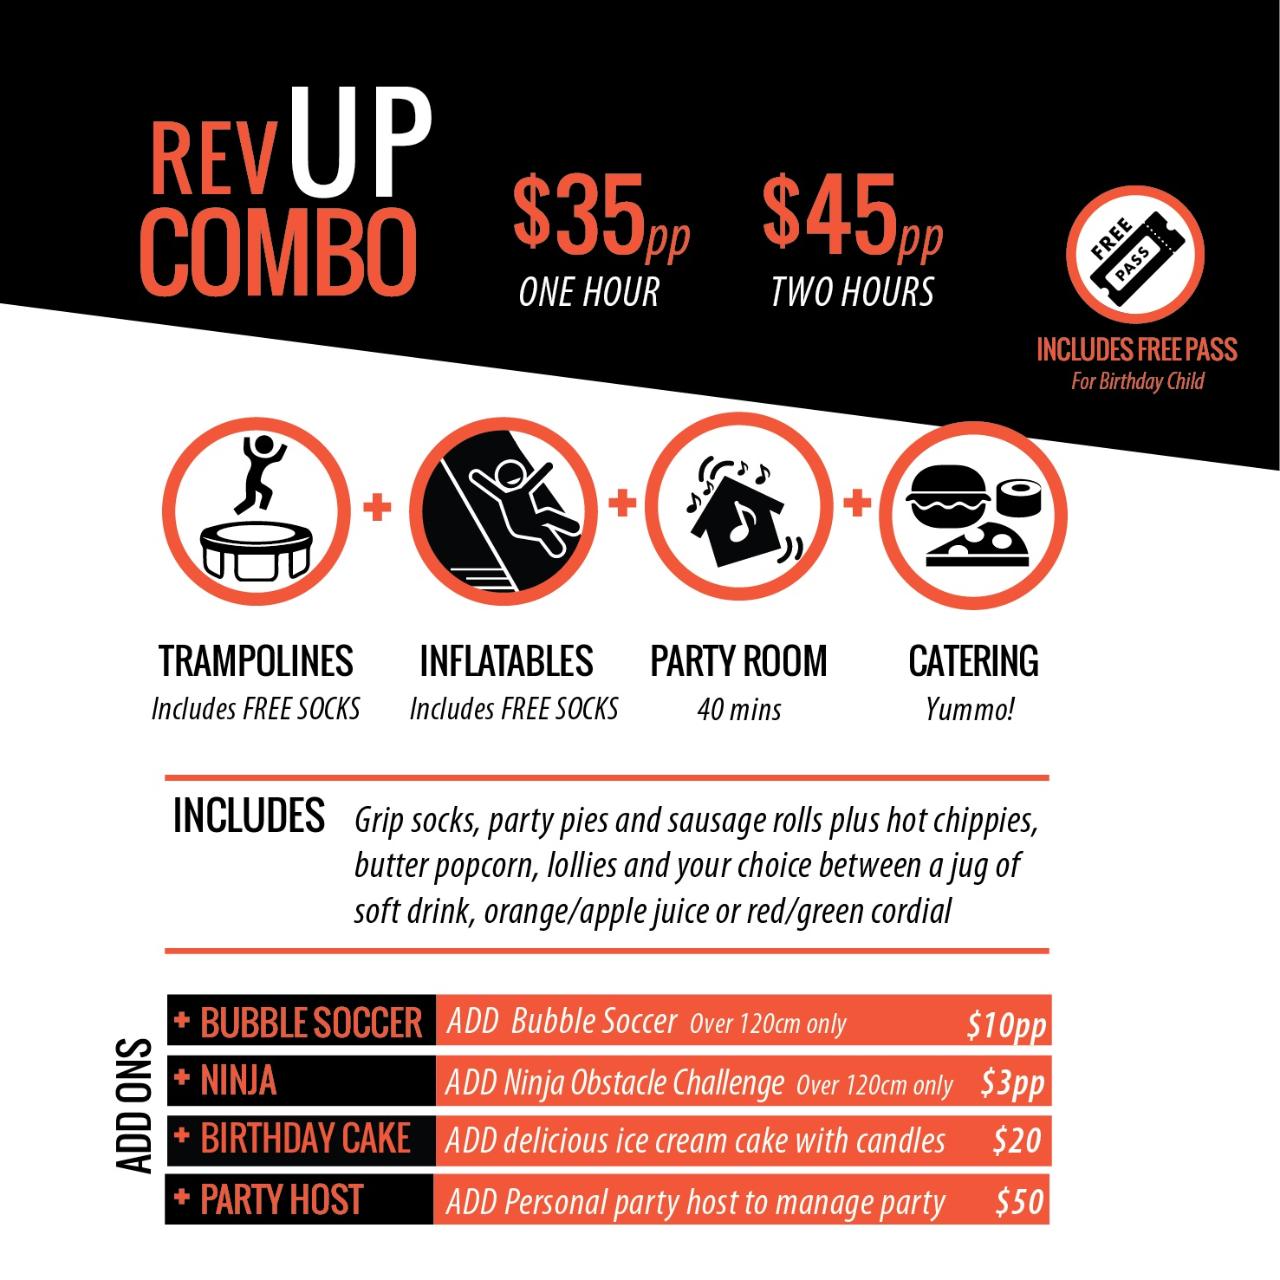 The Rev-Up Combo